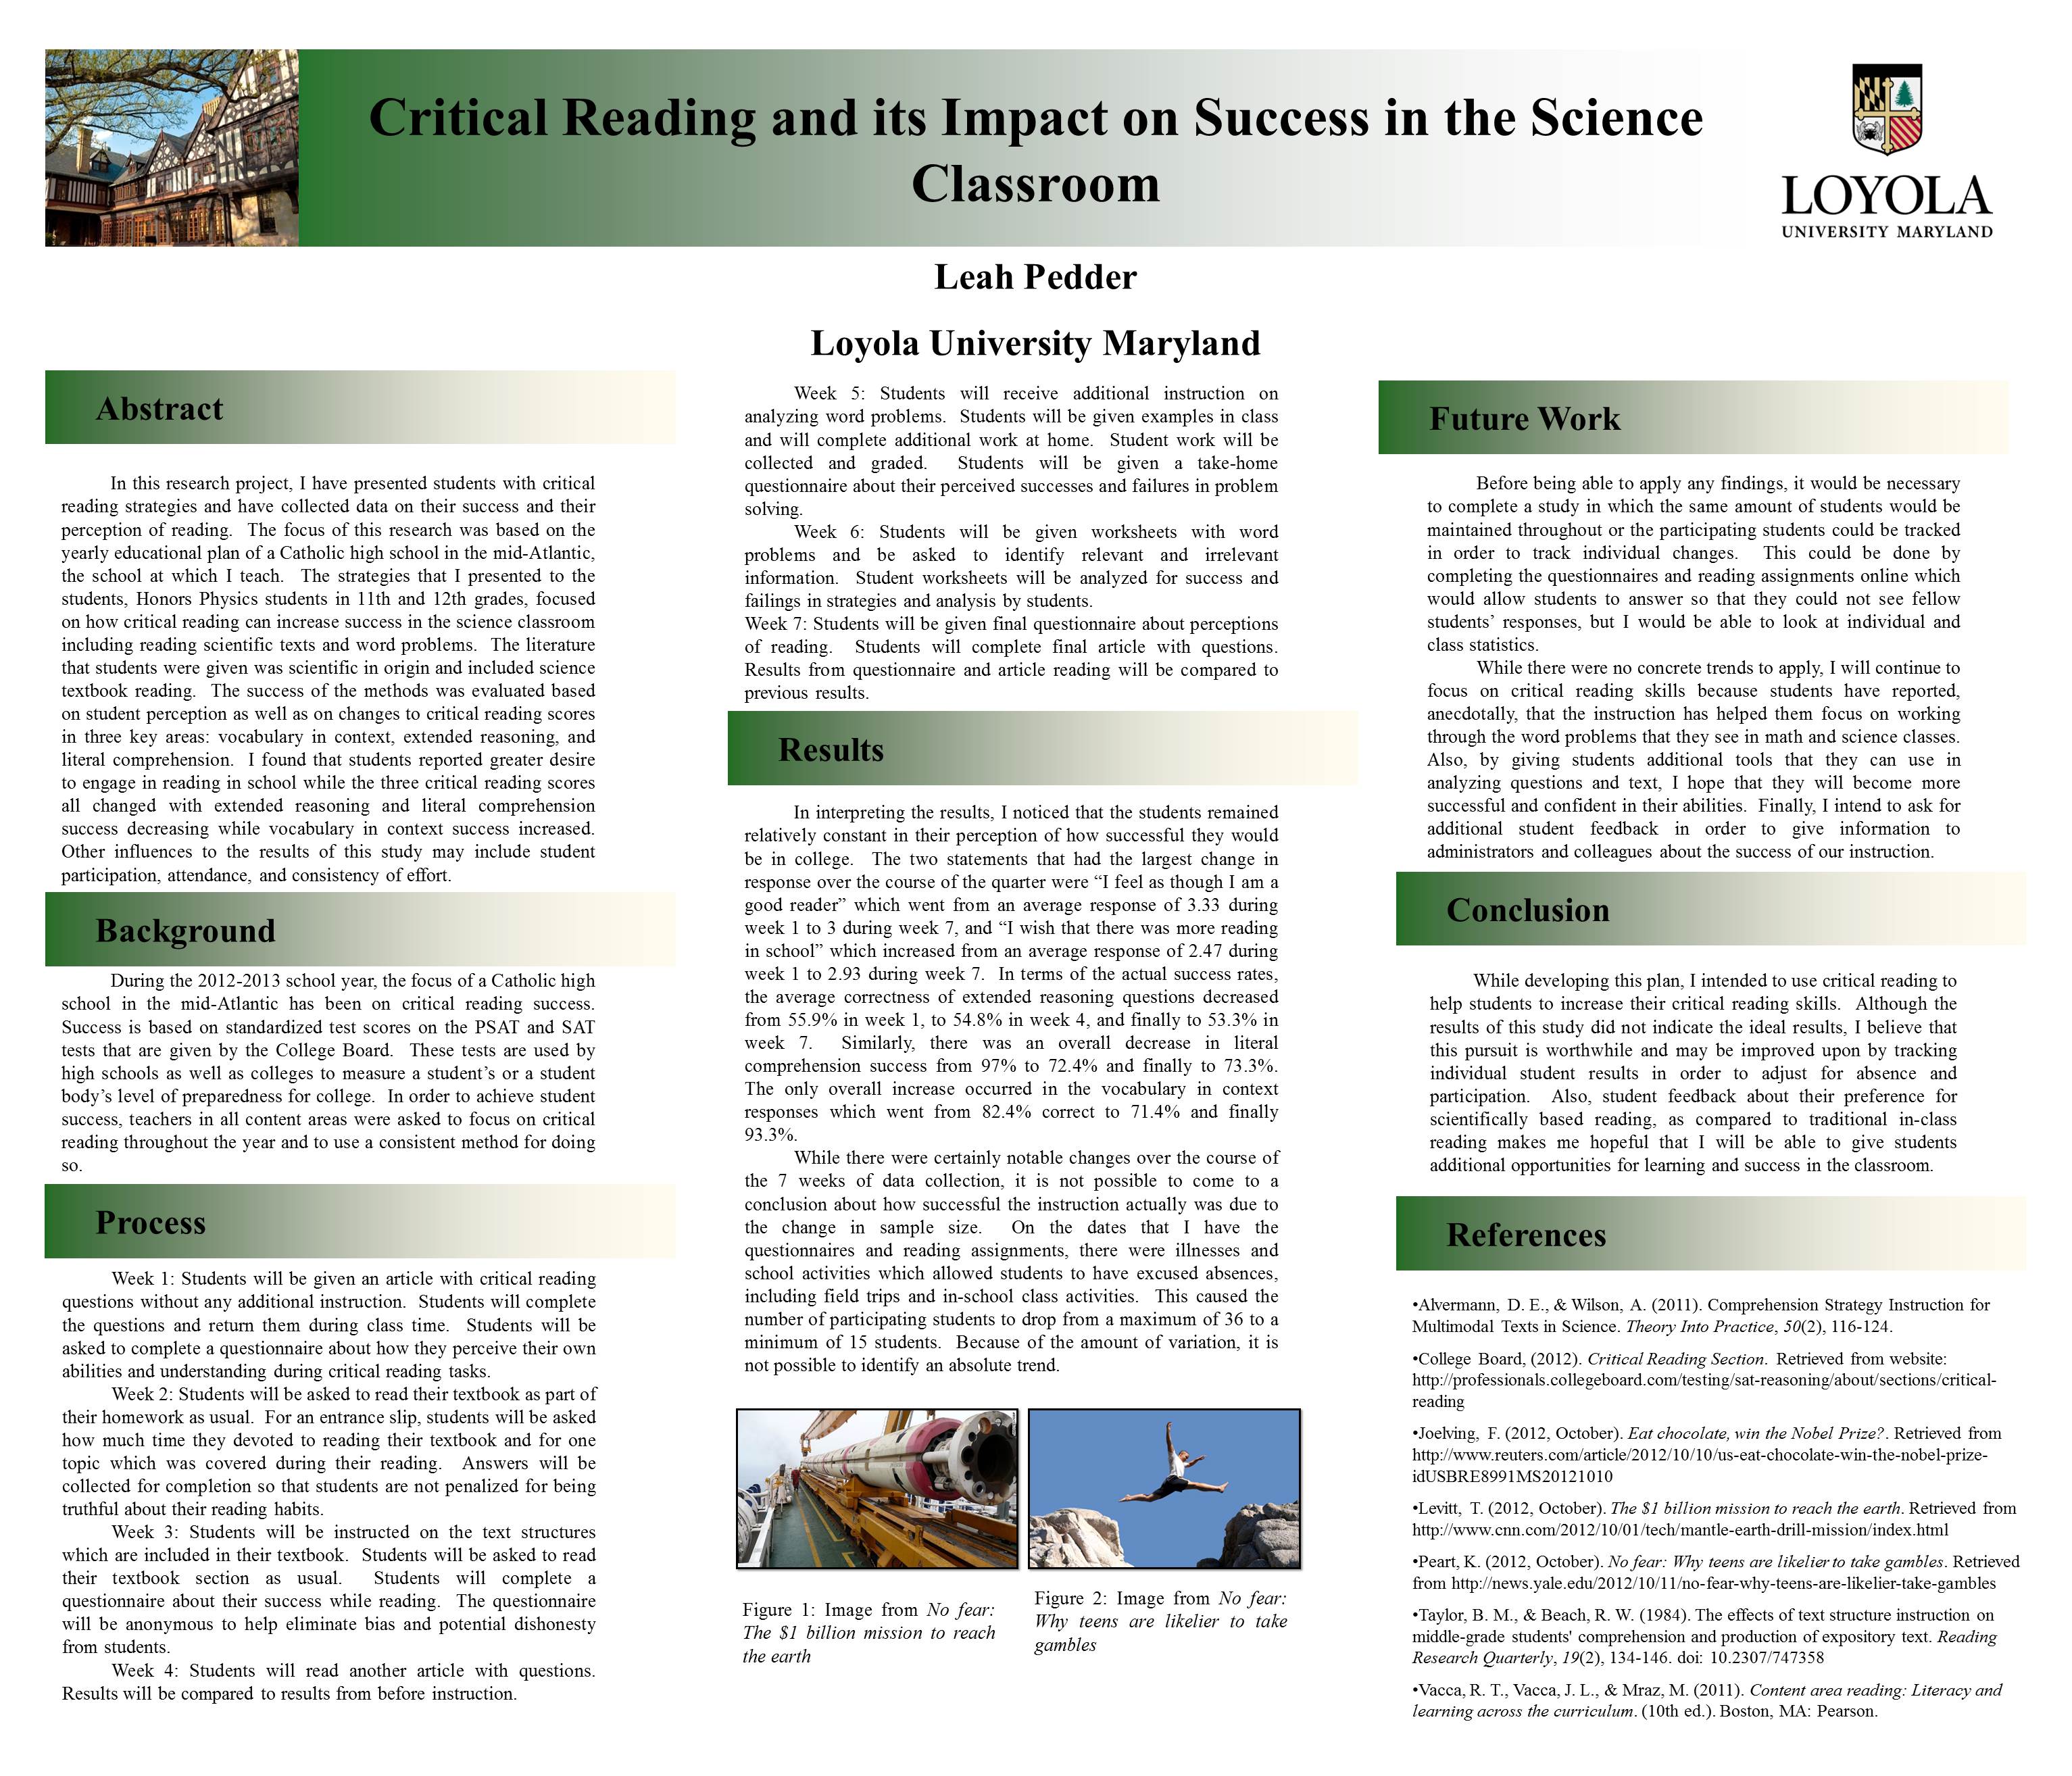 Enlarged poster image: Critical Reading Instruction and its Impact on Success in the Science Classroom